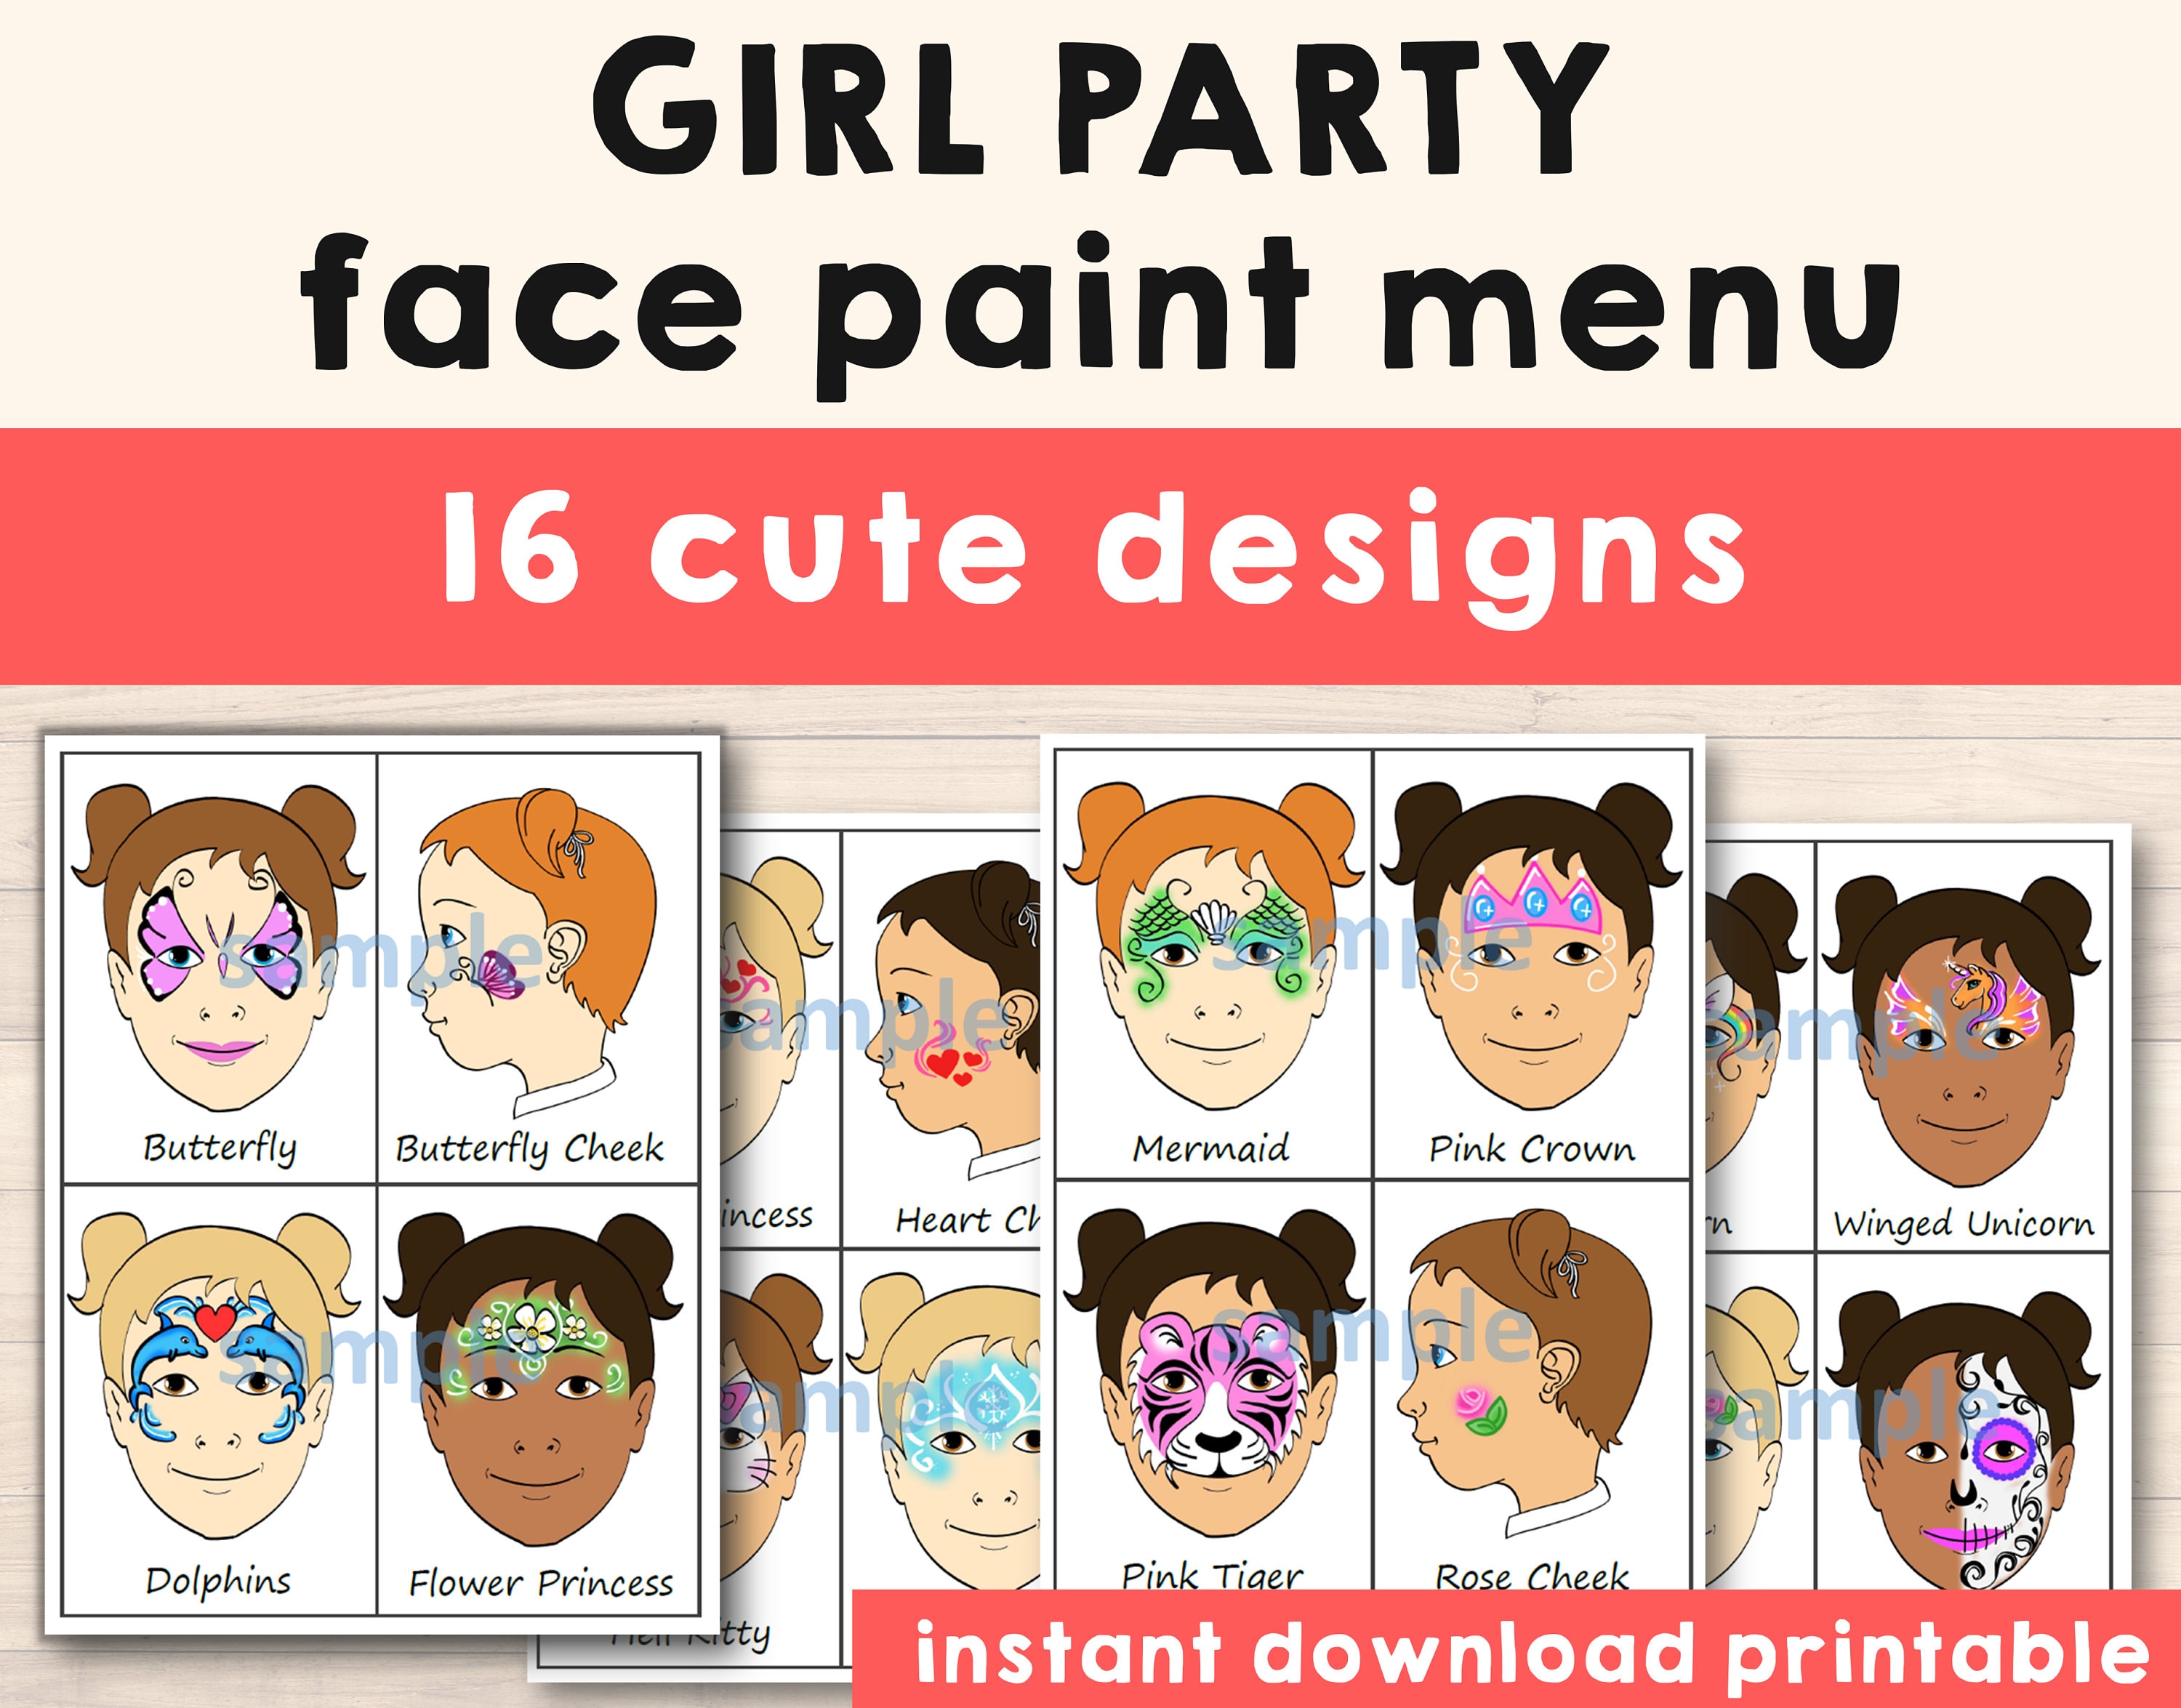 avery chiu recommends backpage paint my face pic